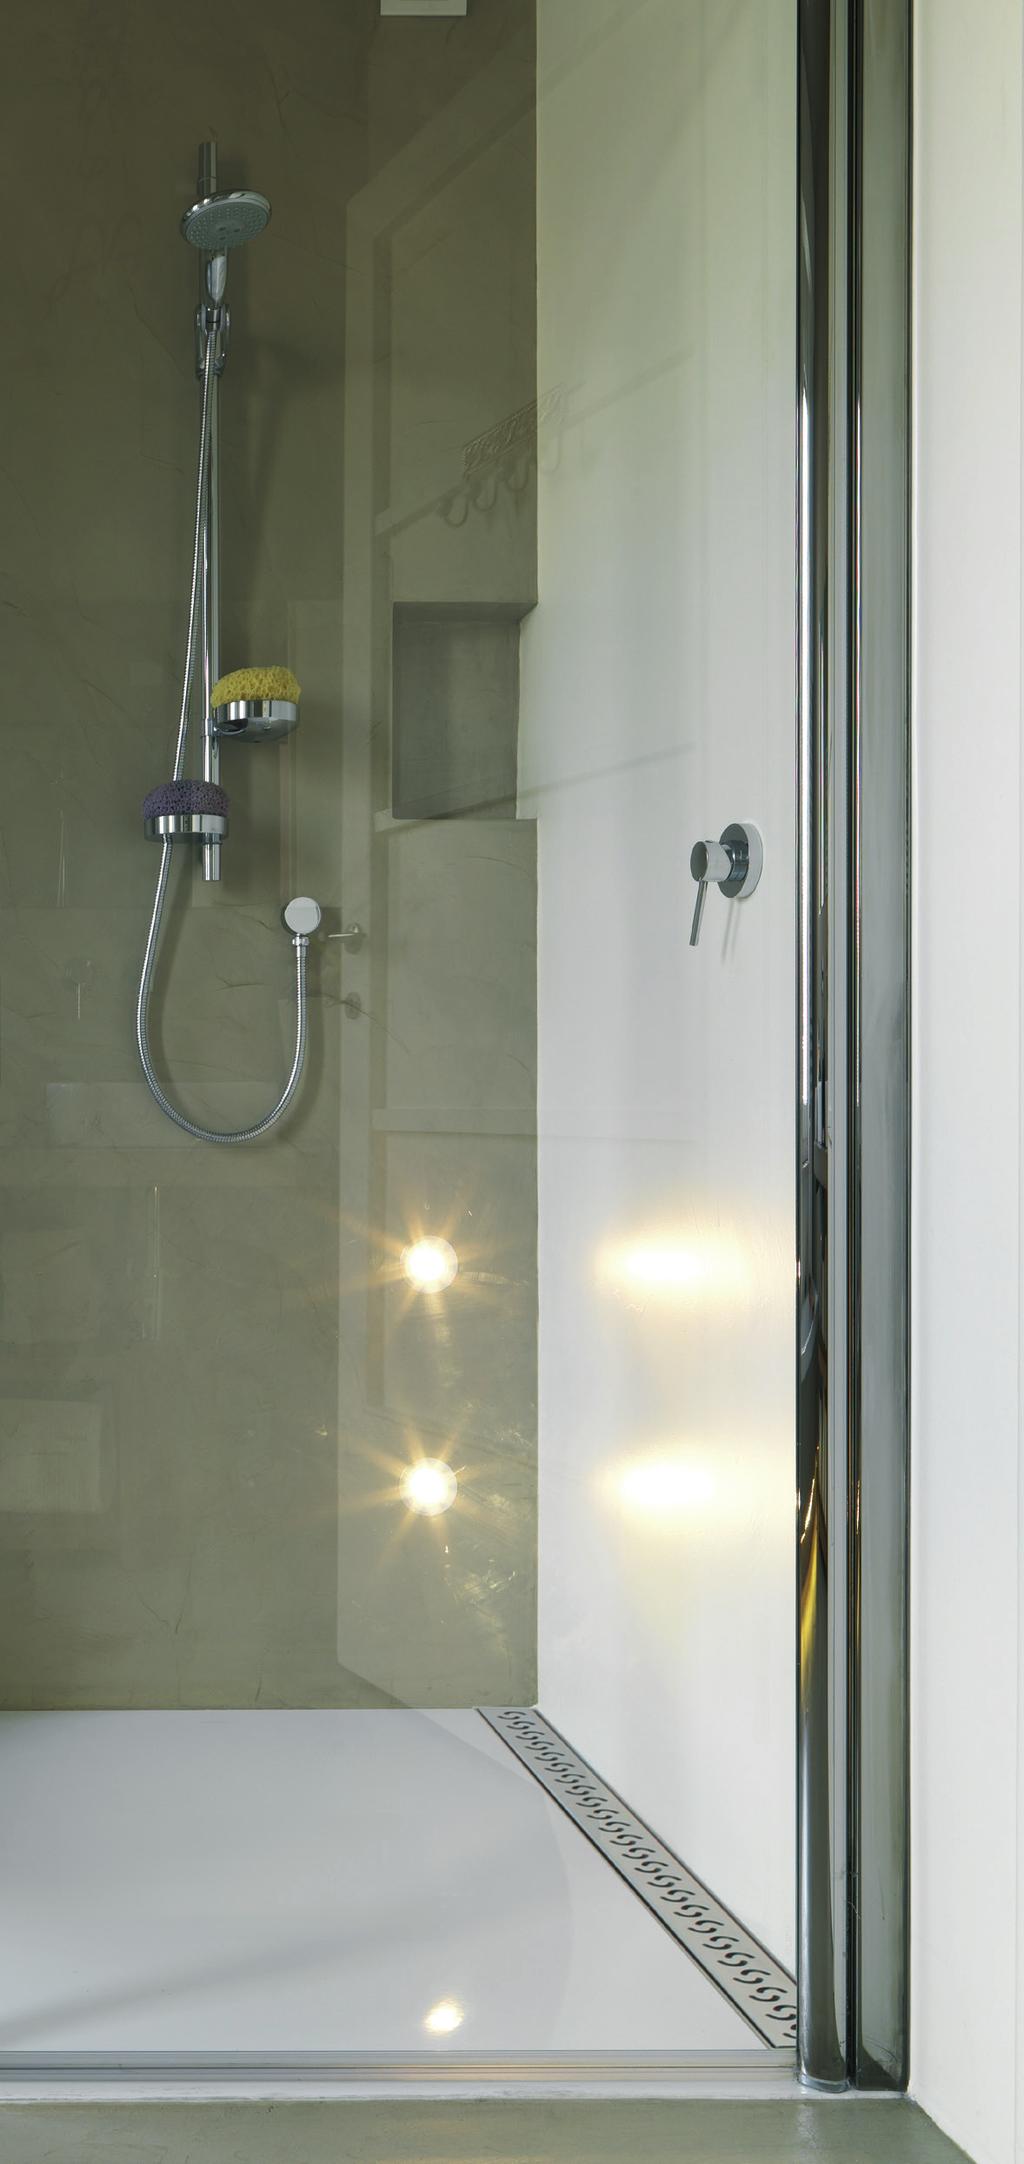 BATHROOM LINEAR DRAINAGE VERSION WITH SIPHON